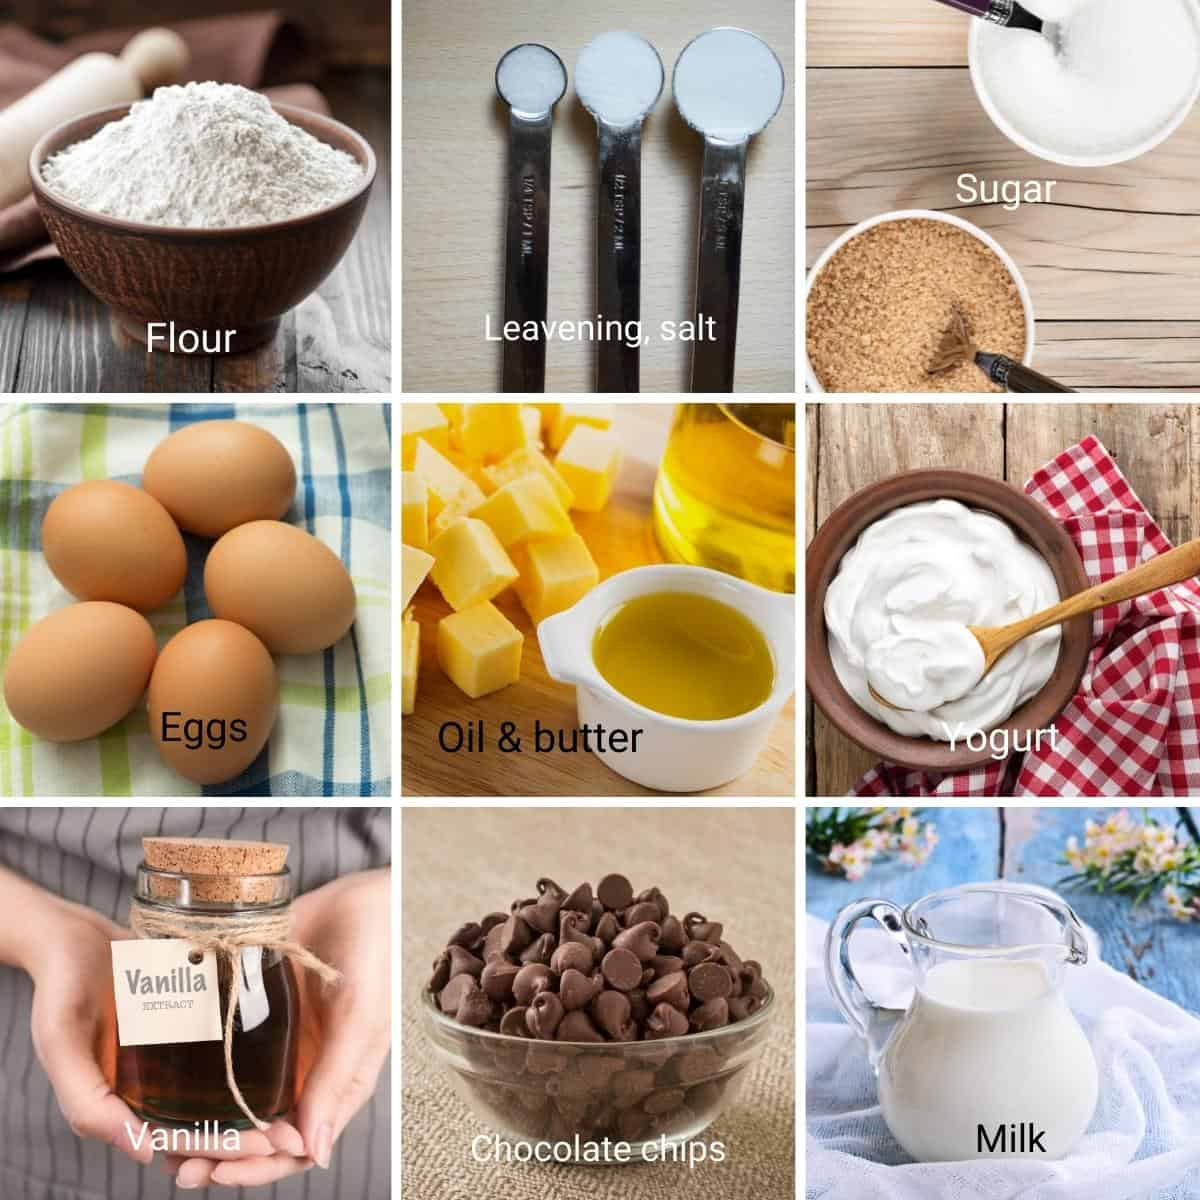 Ingredients for making chocolate cake. 